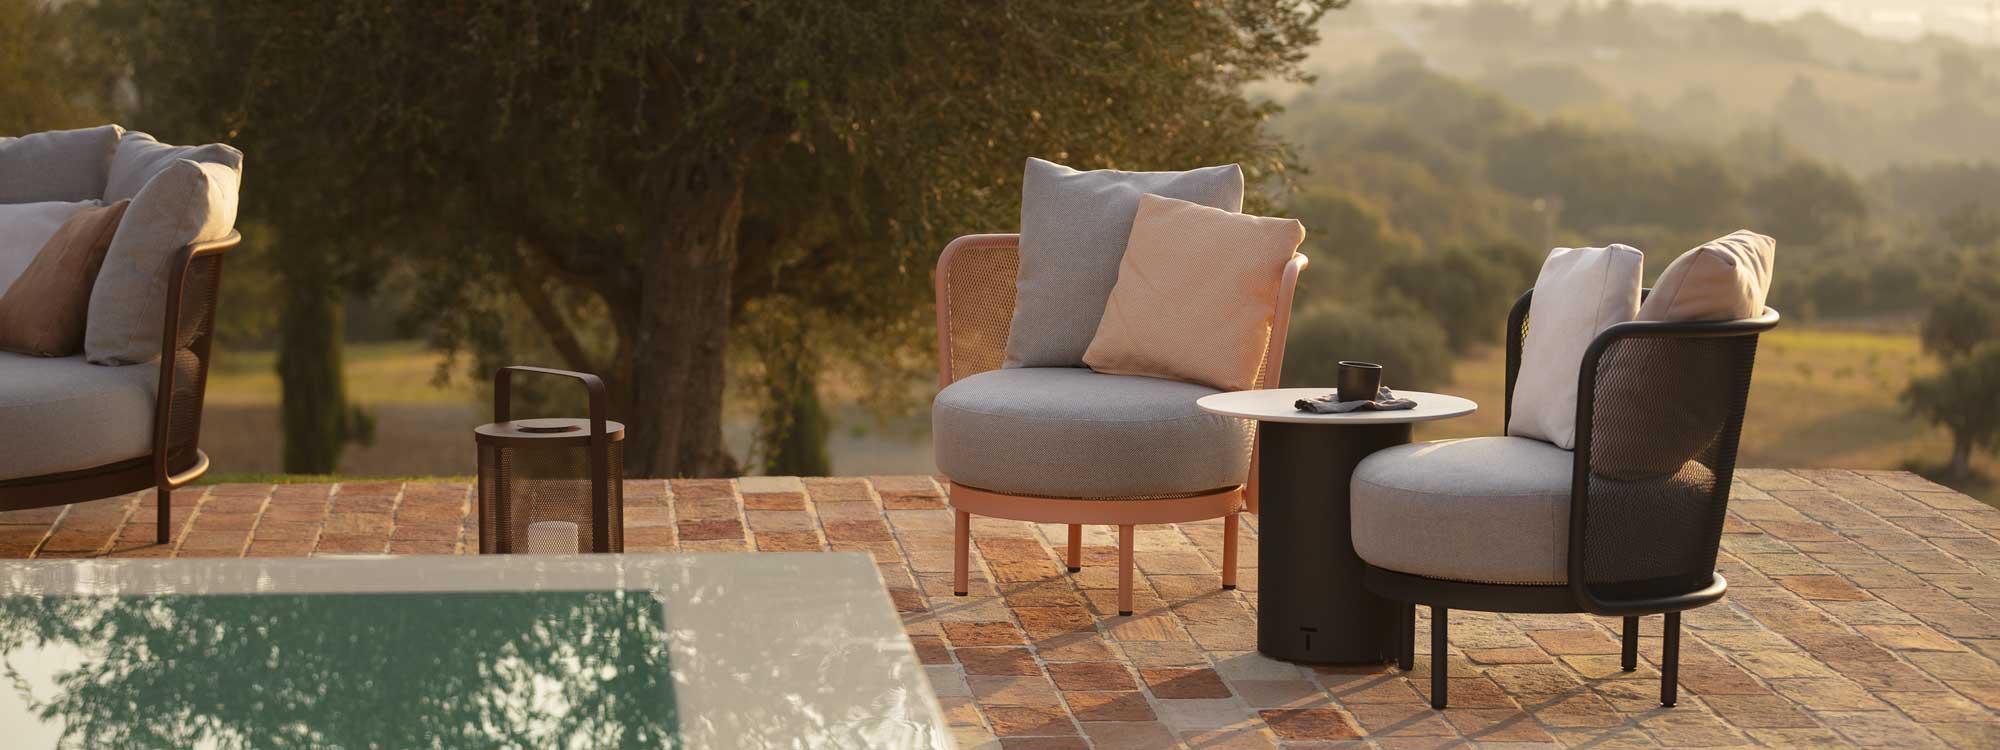 Image of salmon-pink and anthracite Baza Club lounge chairs and Branta modern garden side table on sunny poolside, with rolling countryside and woodland in the background